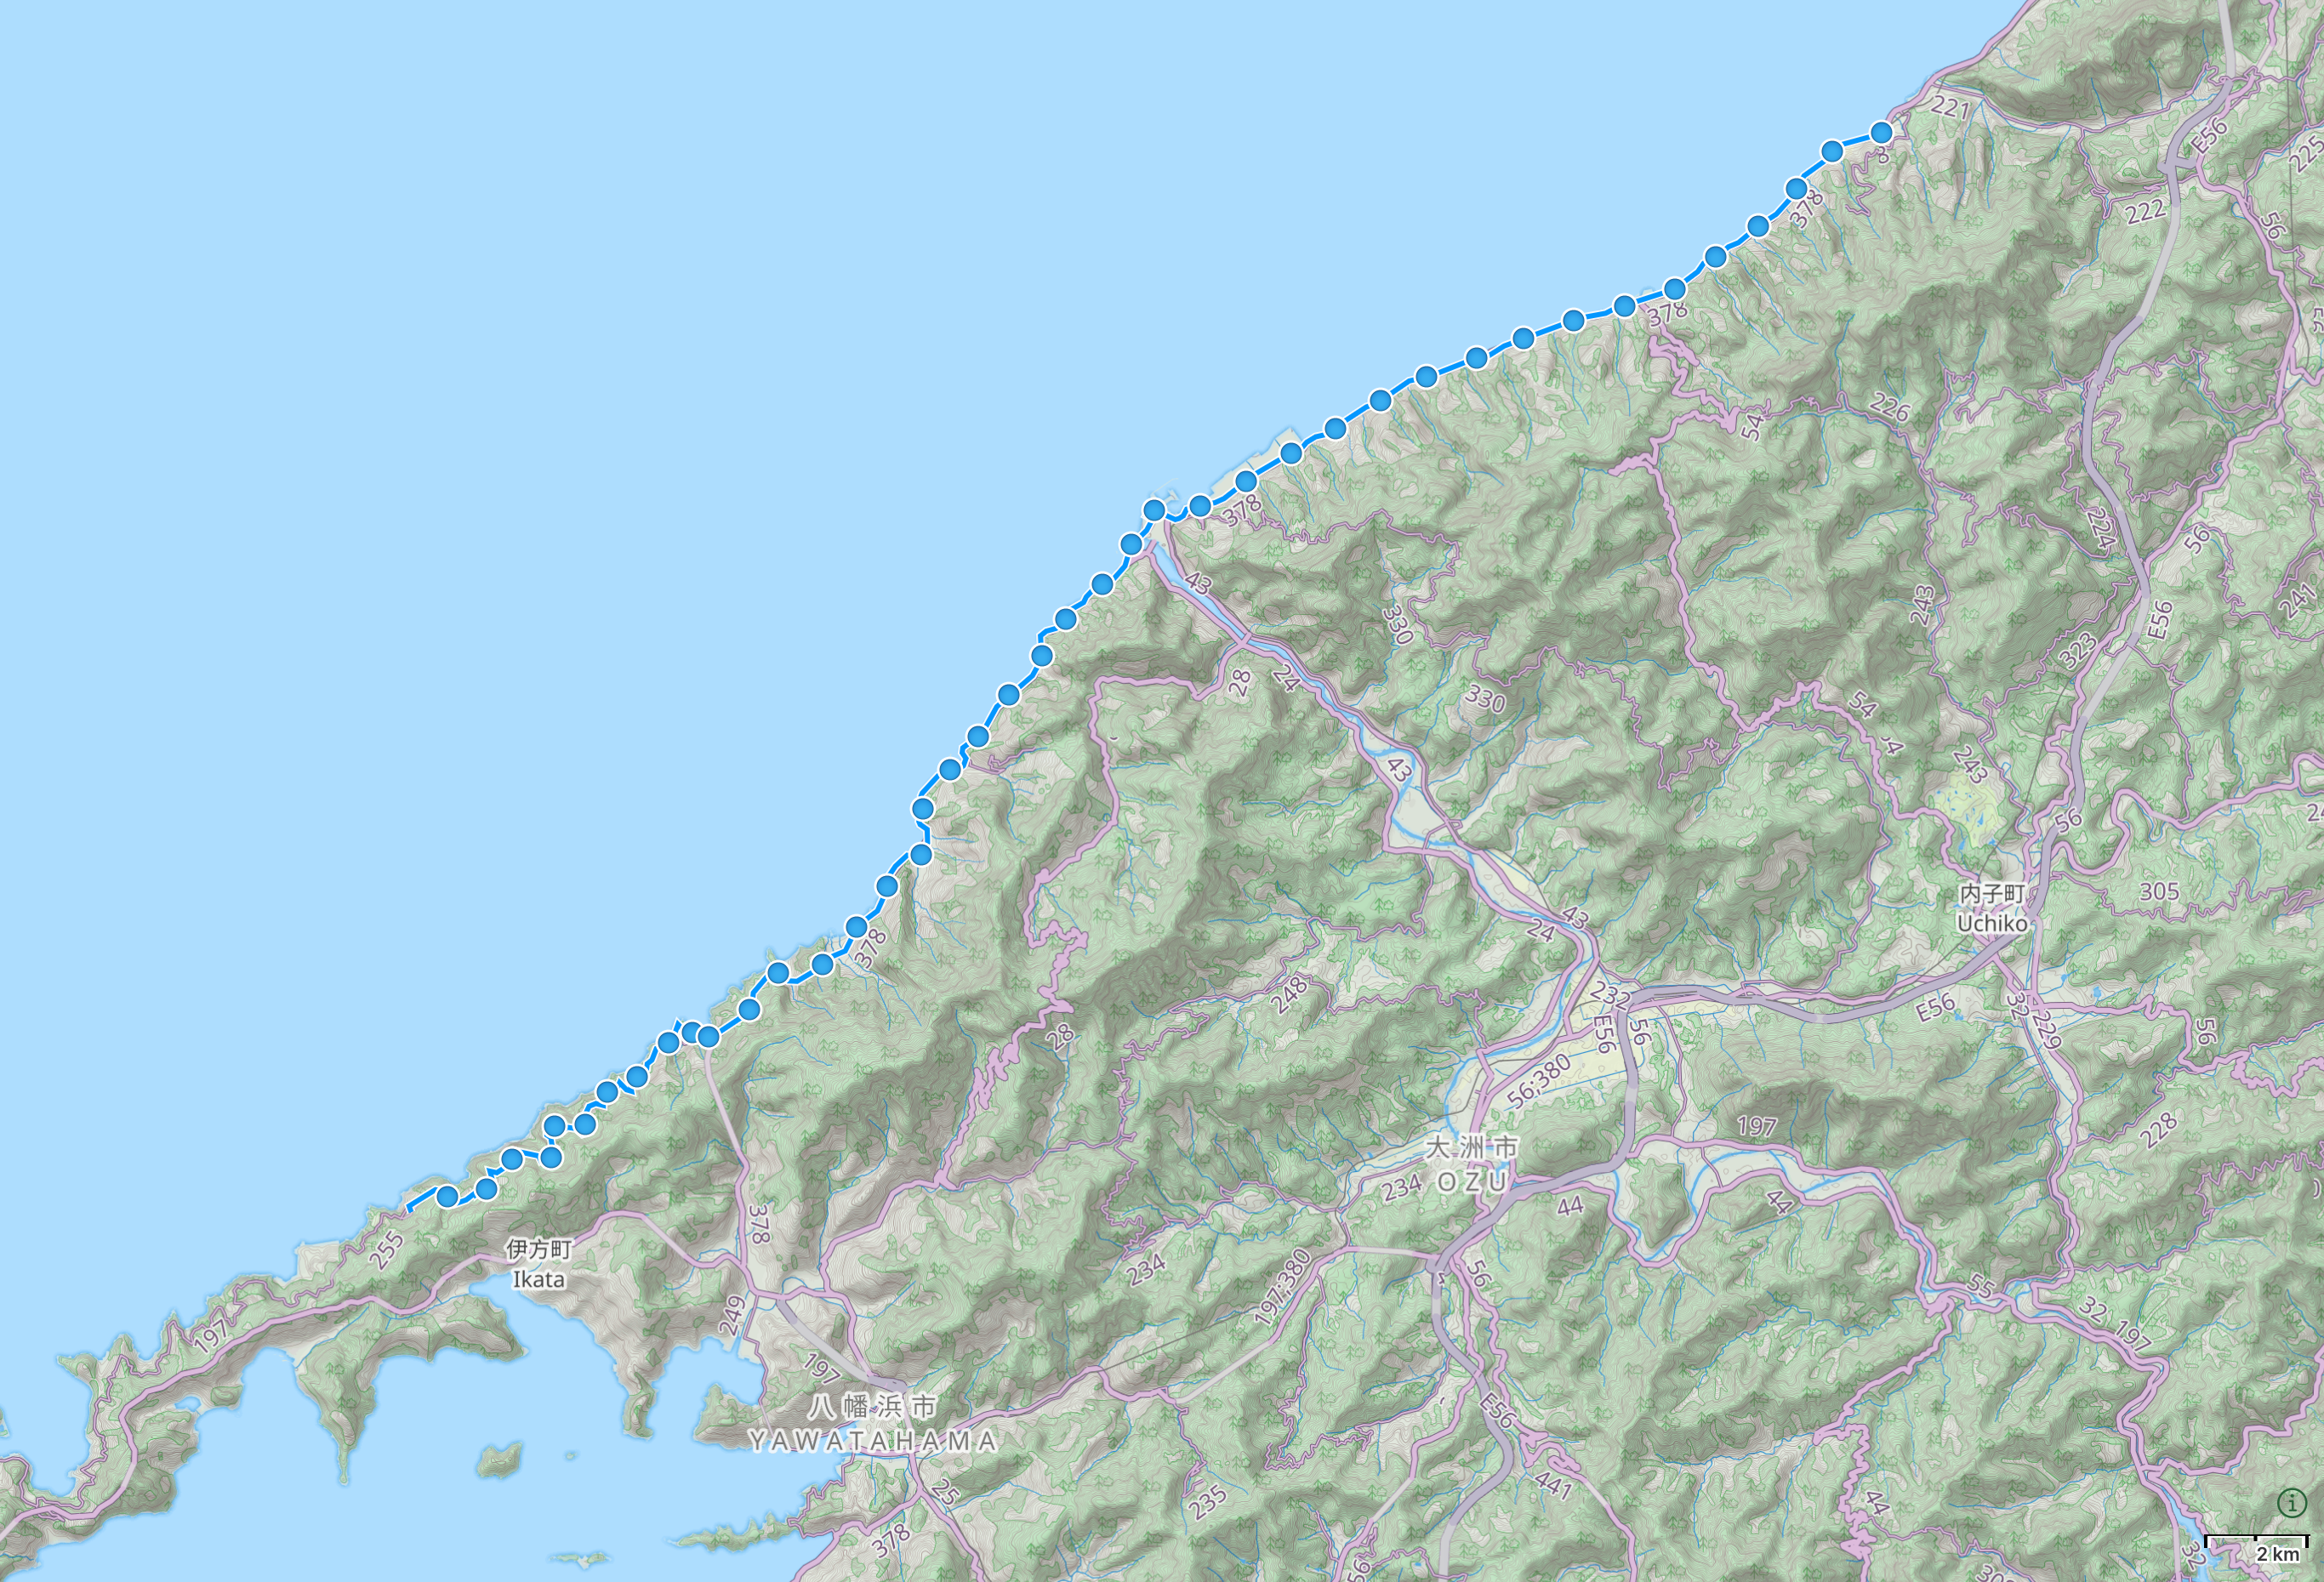 Map of Ehime Prefecture with route between Kameura and Futami highlighted.